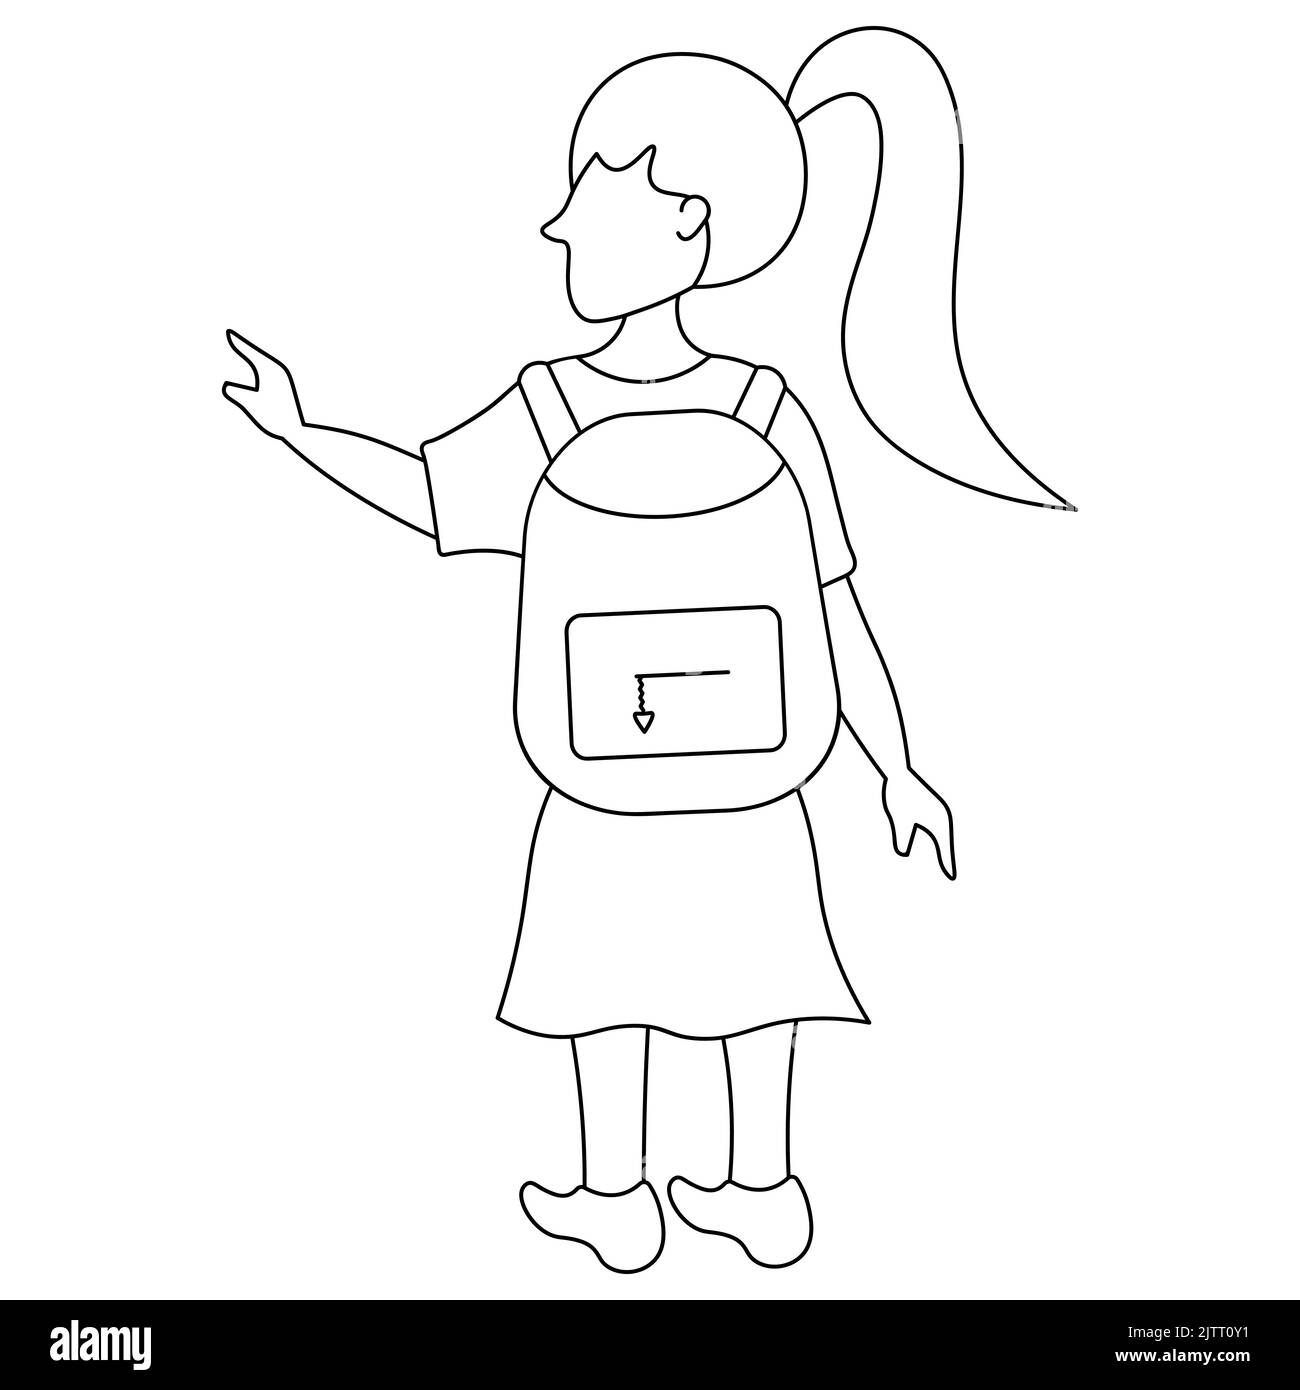 A schoolgirl with a backpack for textbooks waves her hand to someone. Sketch. Vector illustration. Girl with ponytail view from the back. Doodle style Stock Vector